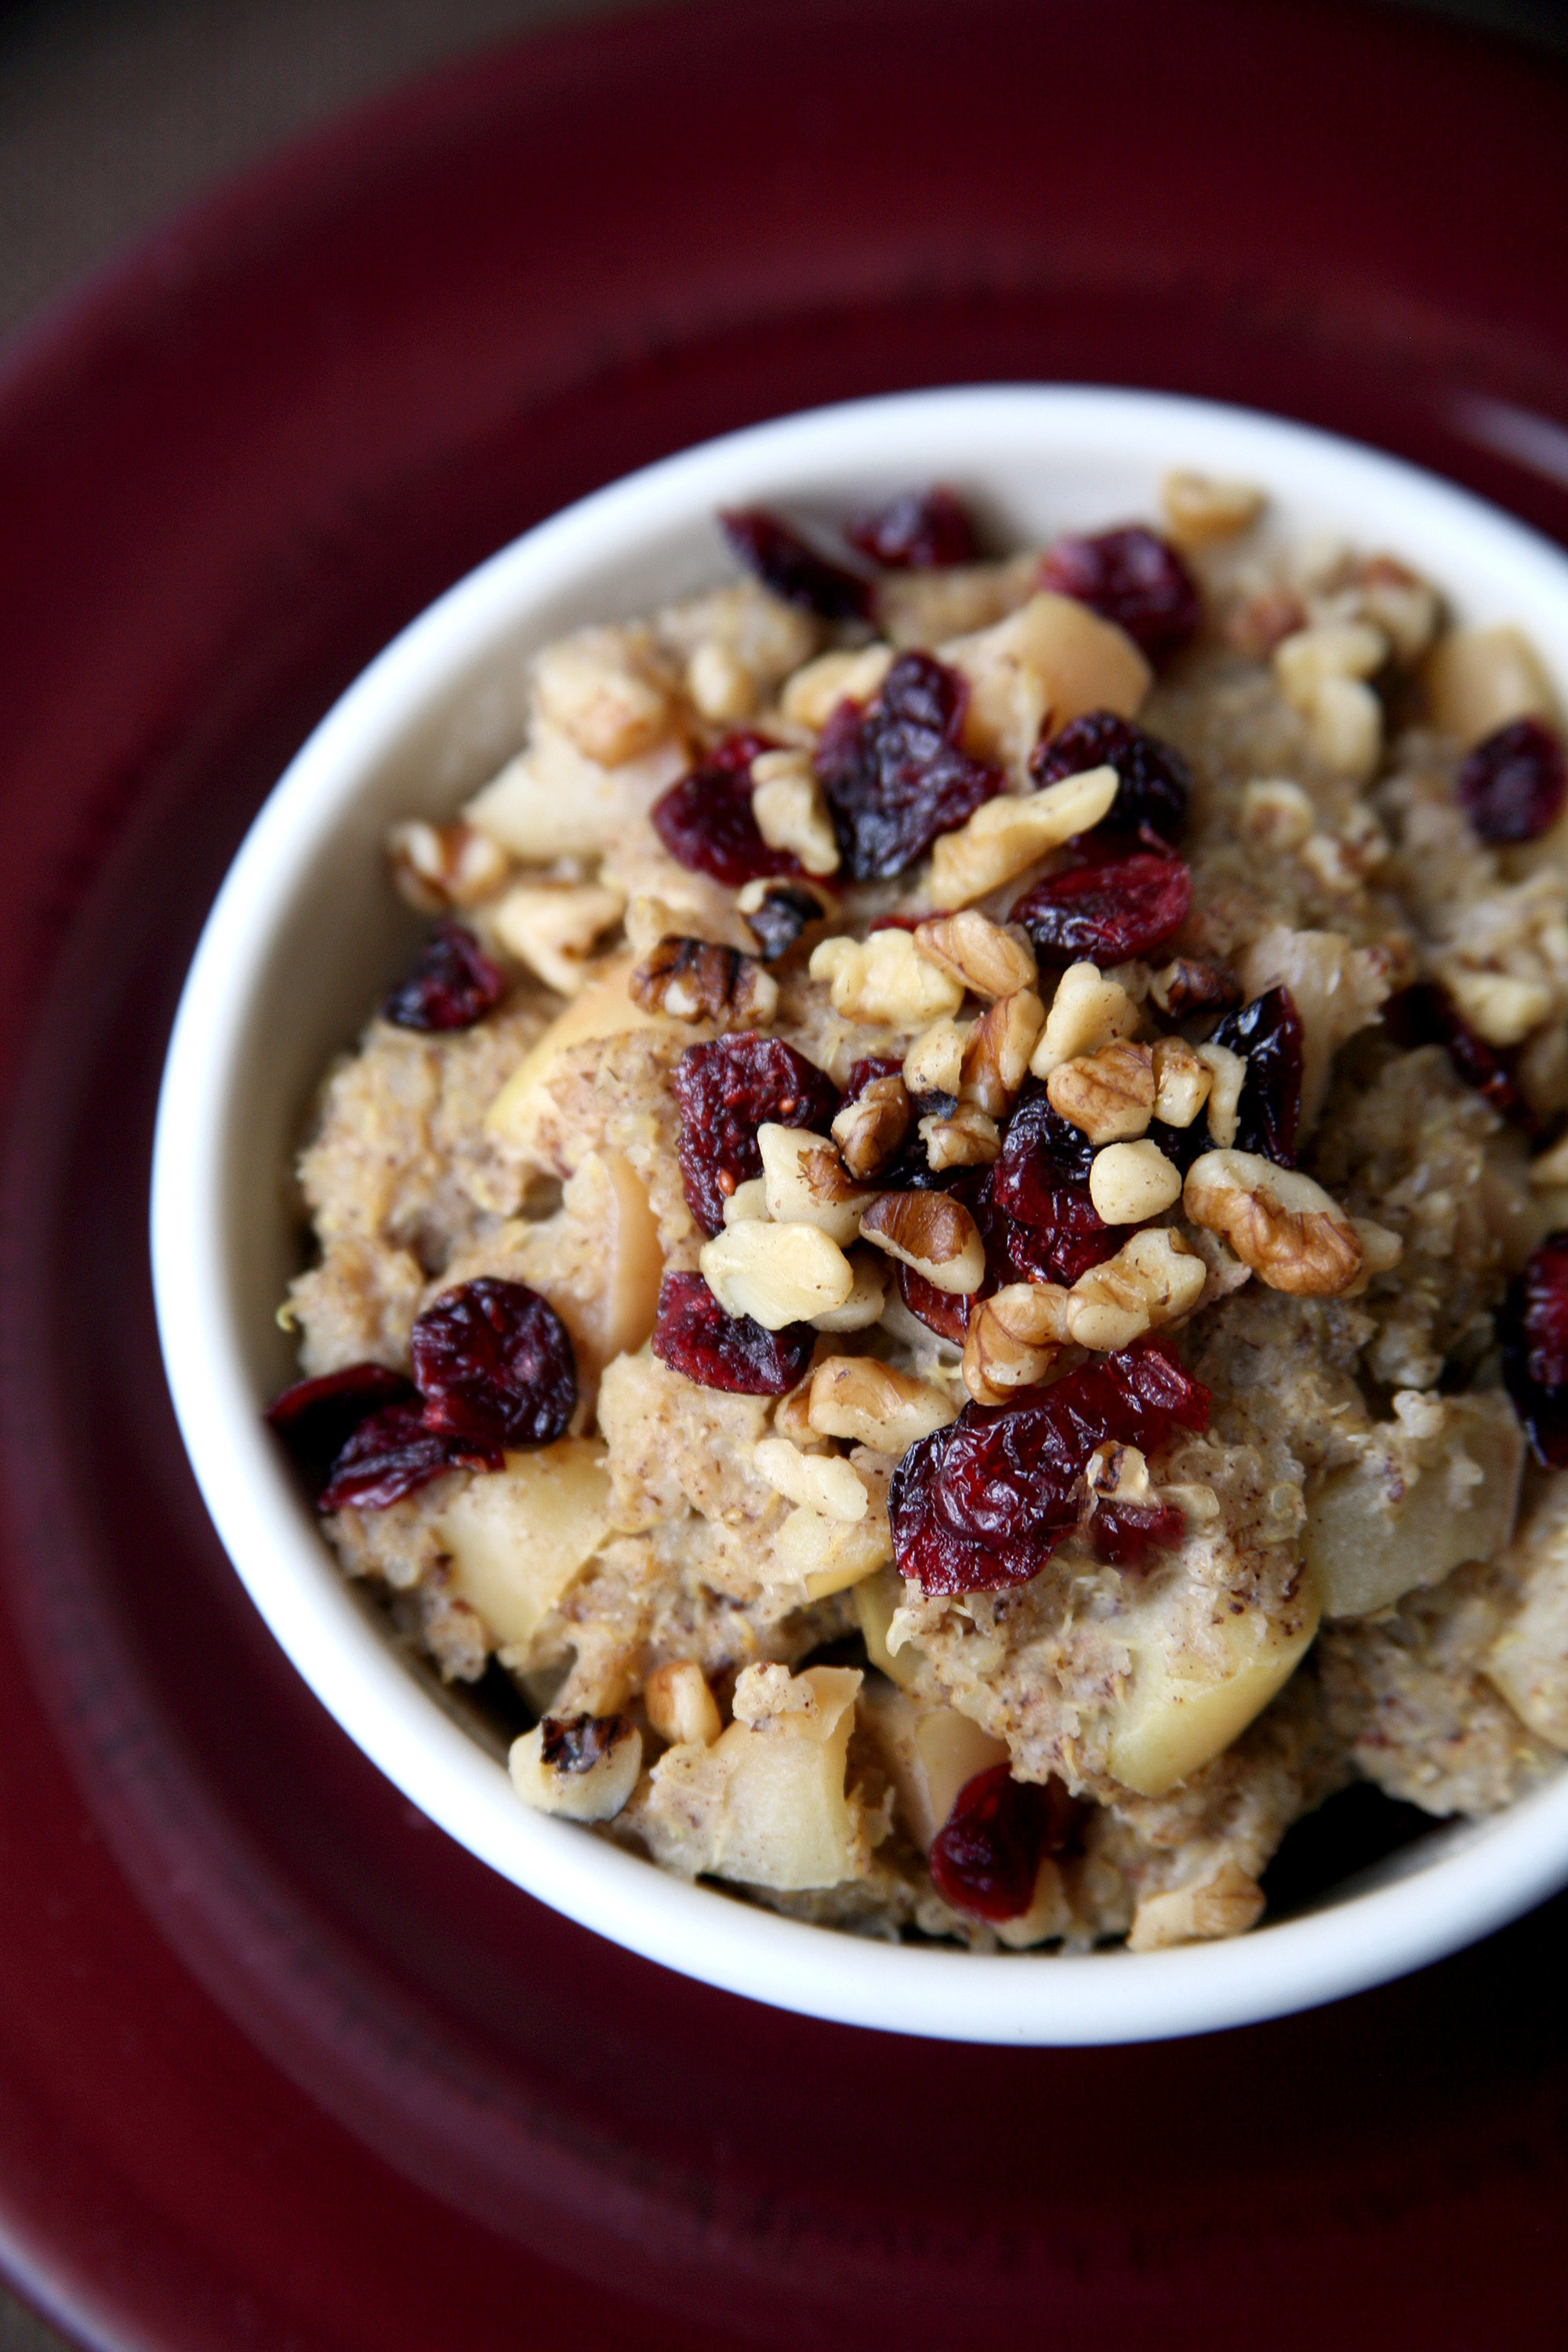 With Just 5 Minutes of Prep, You Can Enjoy Apple Pie Quinoa All Week Long